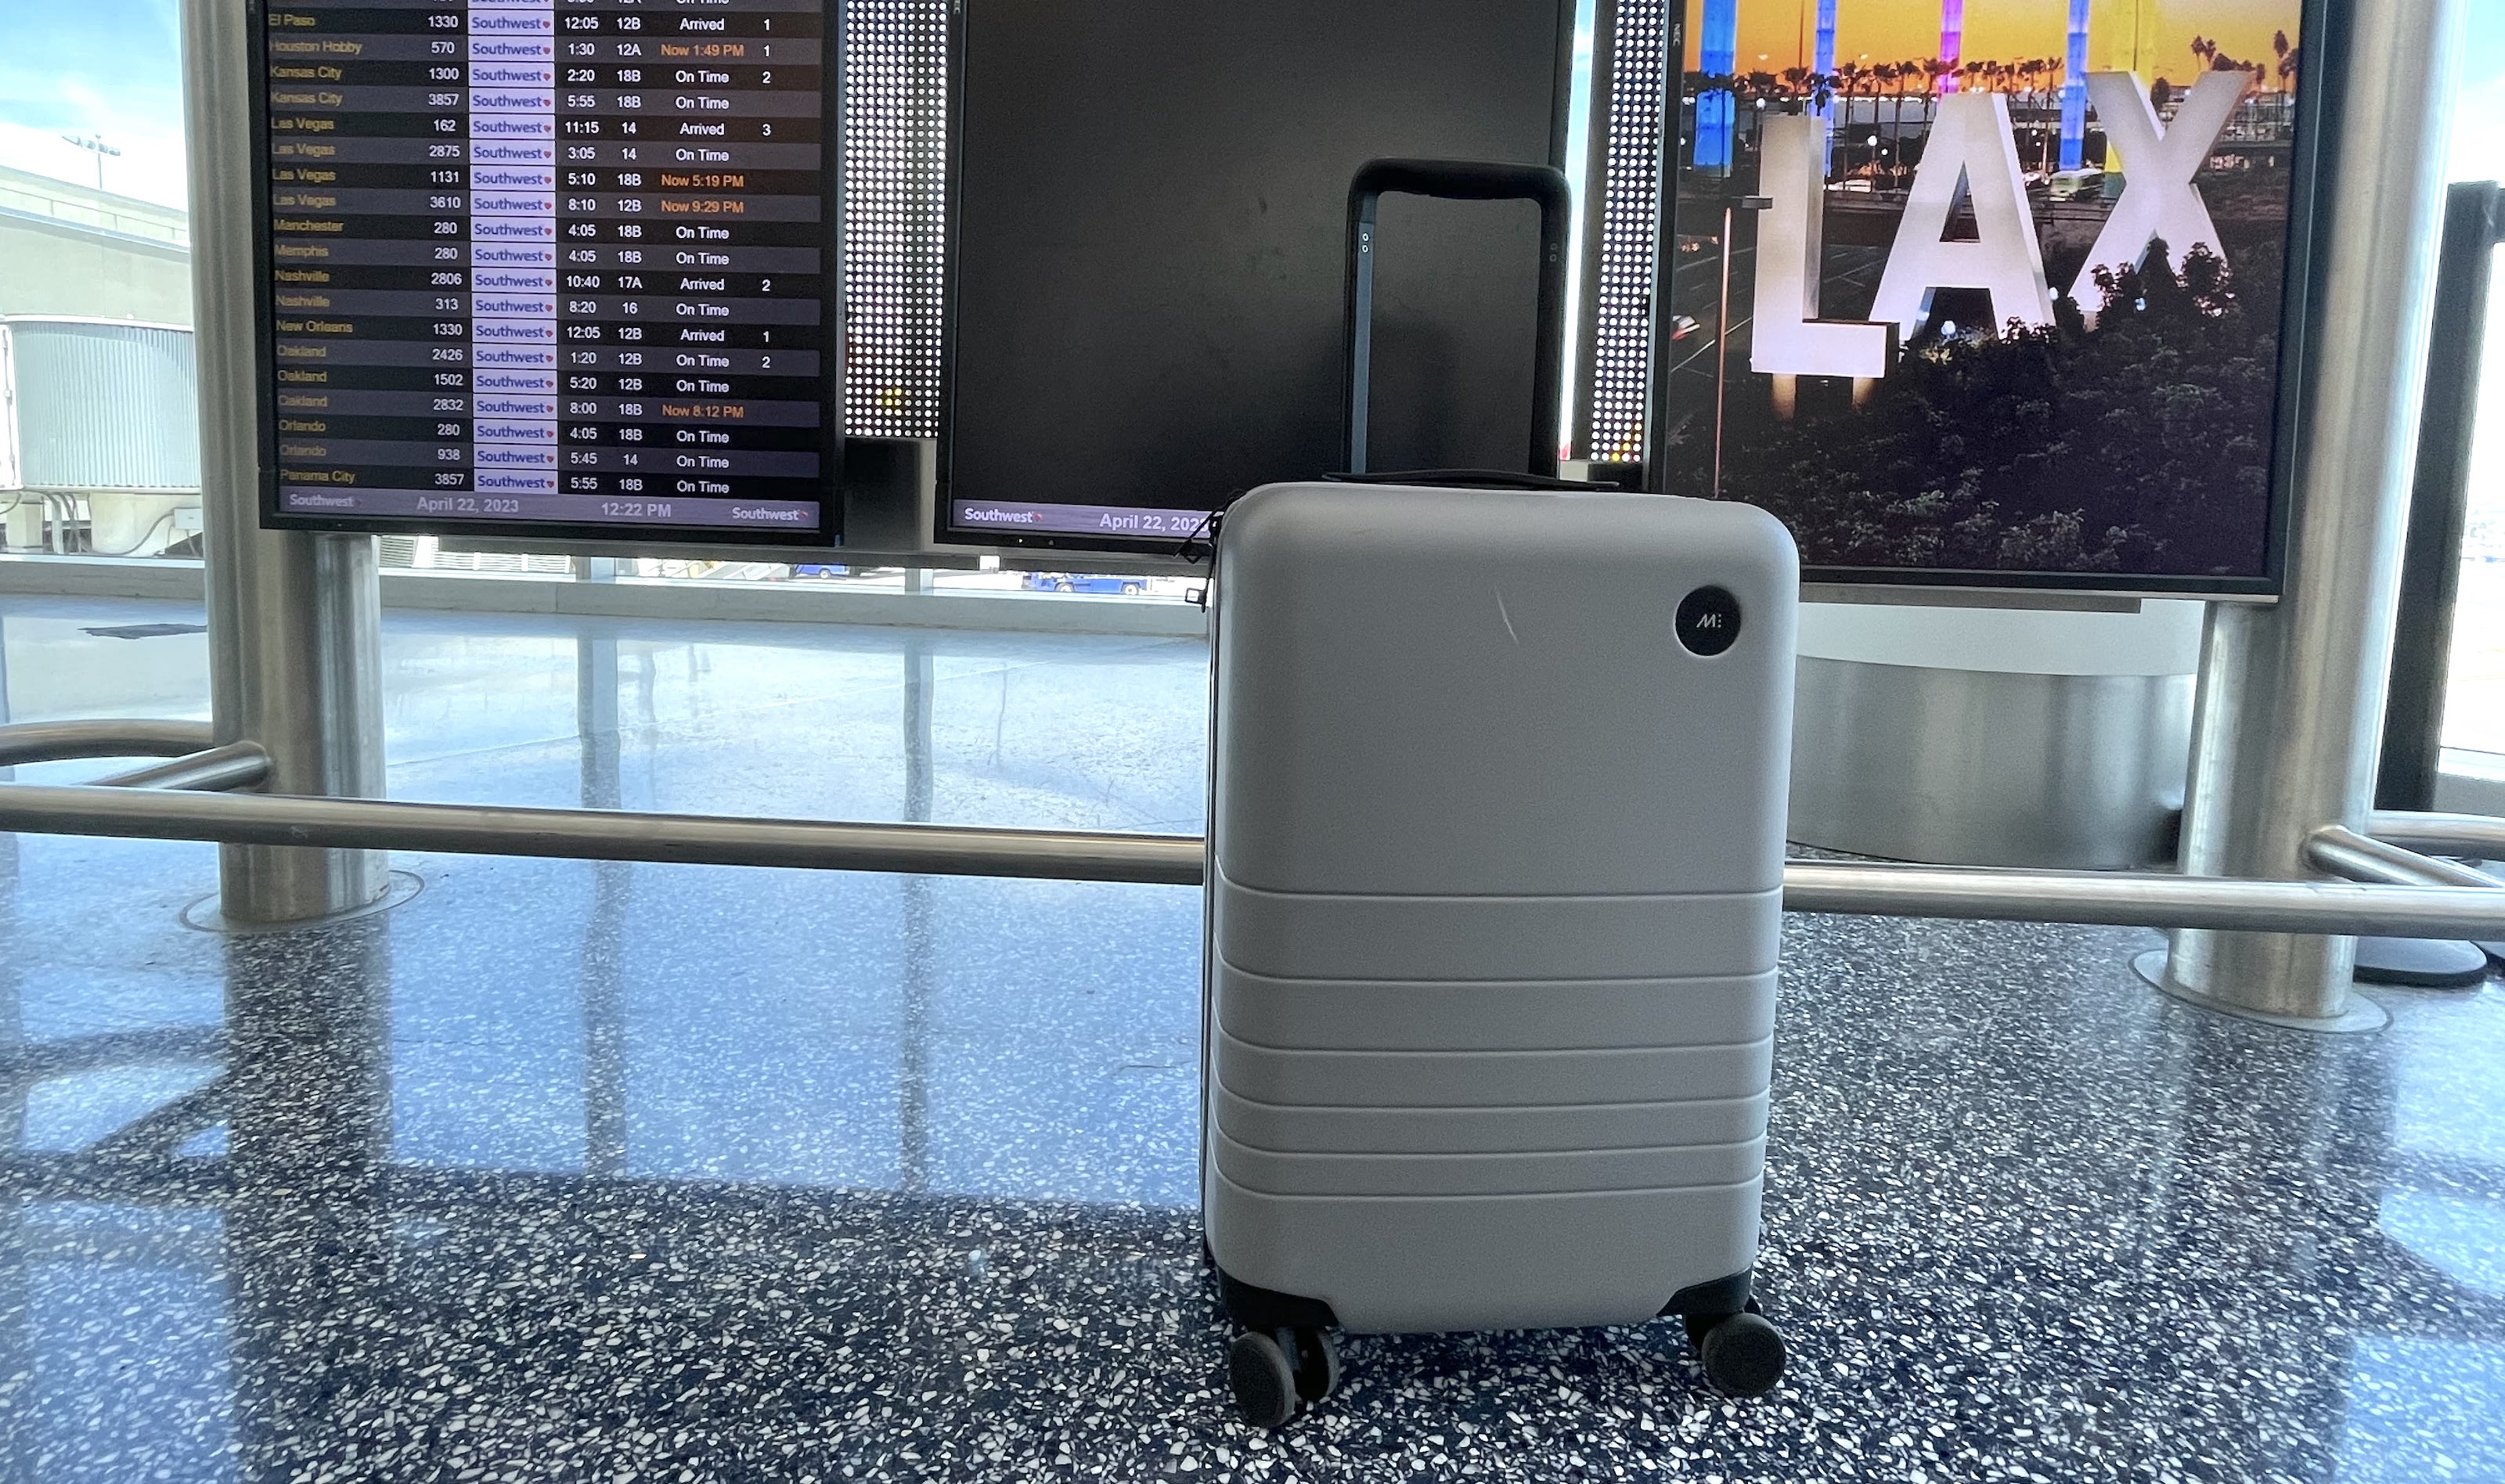 Best Carry-On with Front Pocket  Cabin Size Monos Travel Luggage